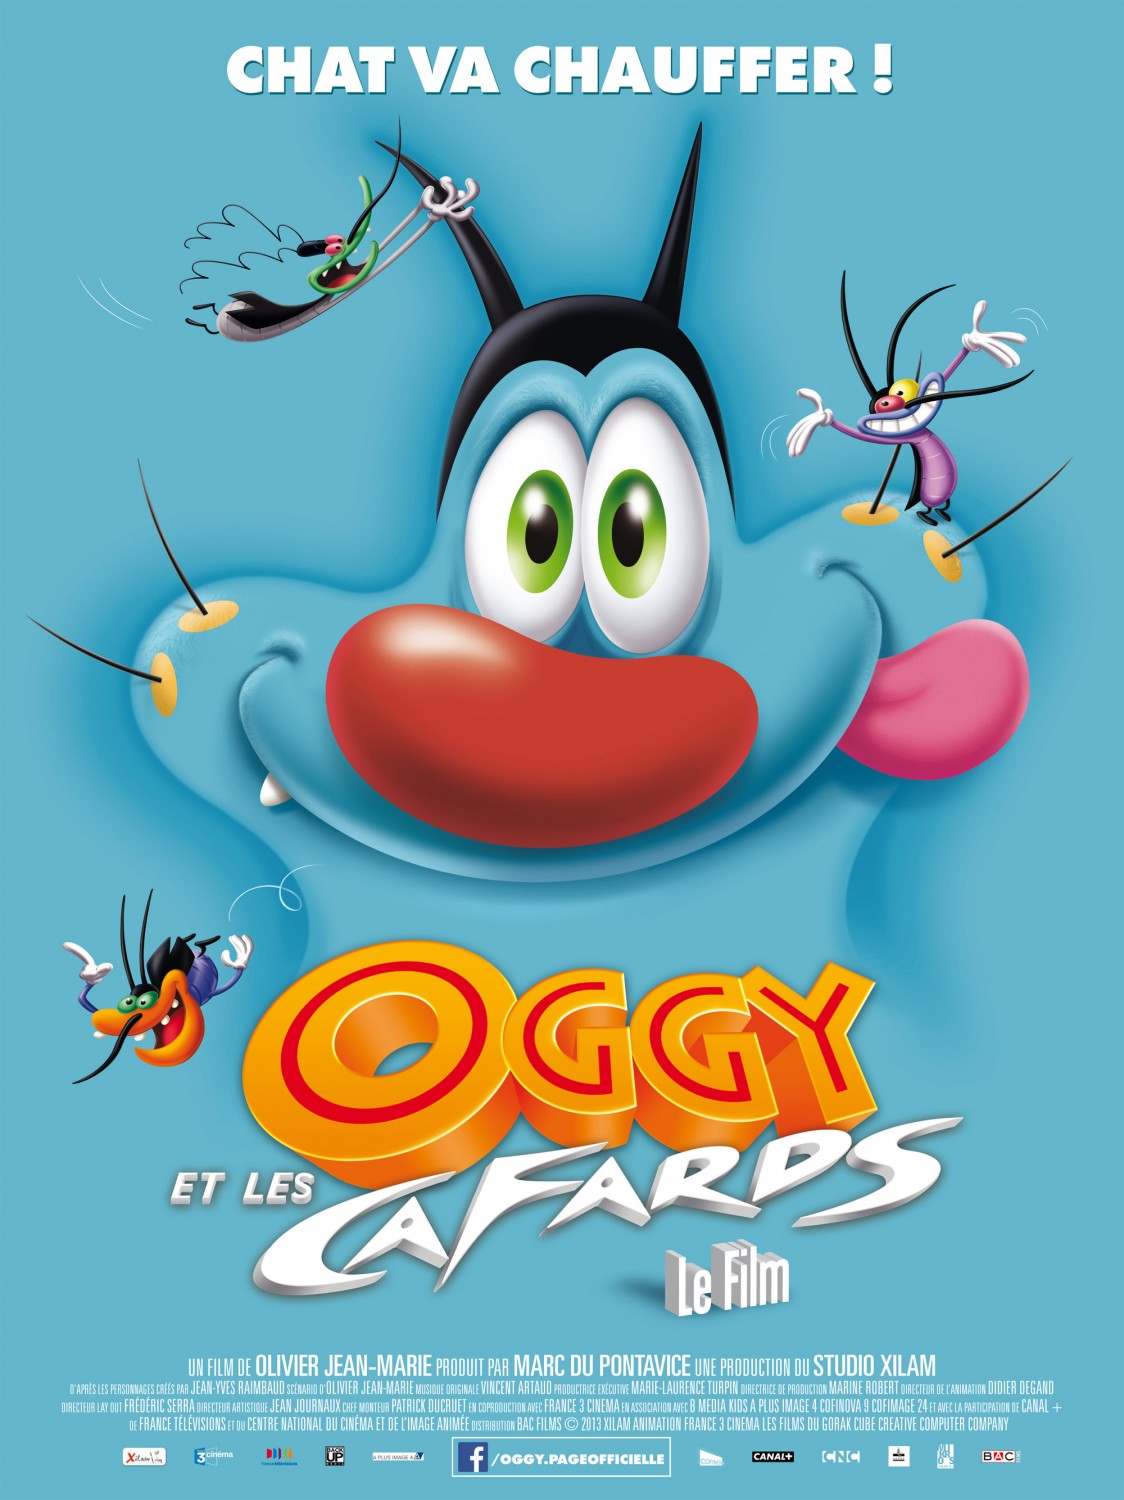 Extra Large Movie Poster Image for Oggy et les cafards 